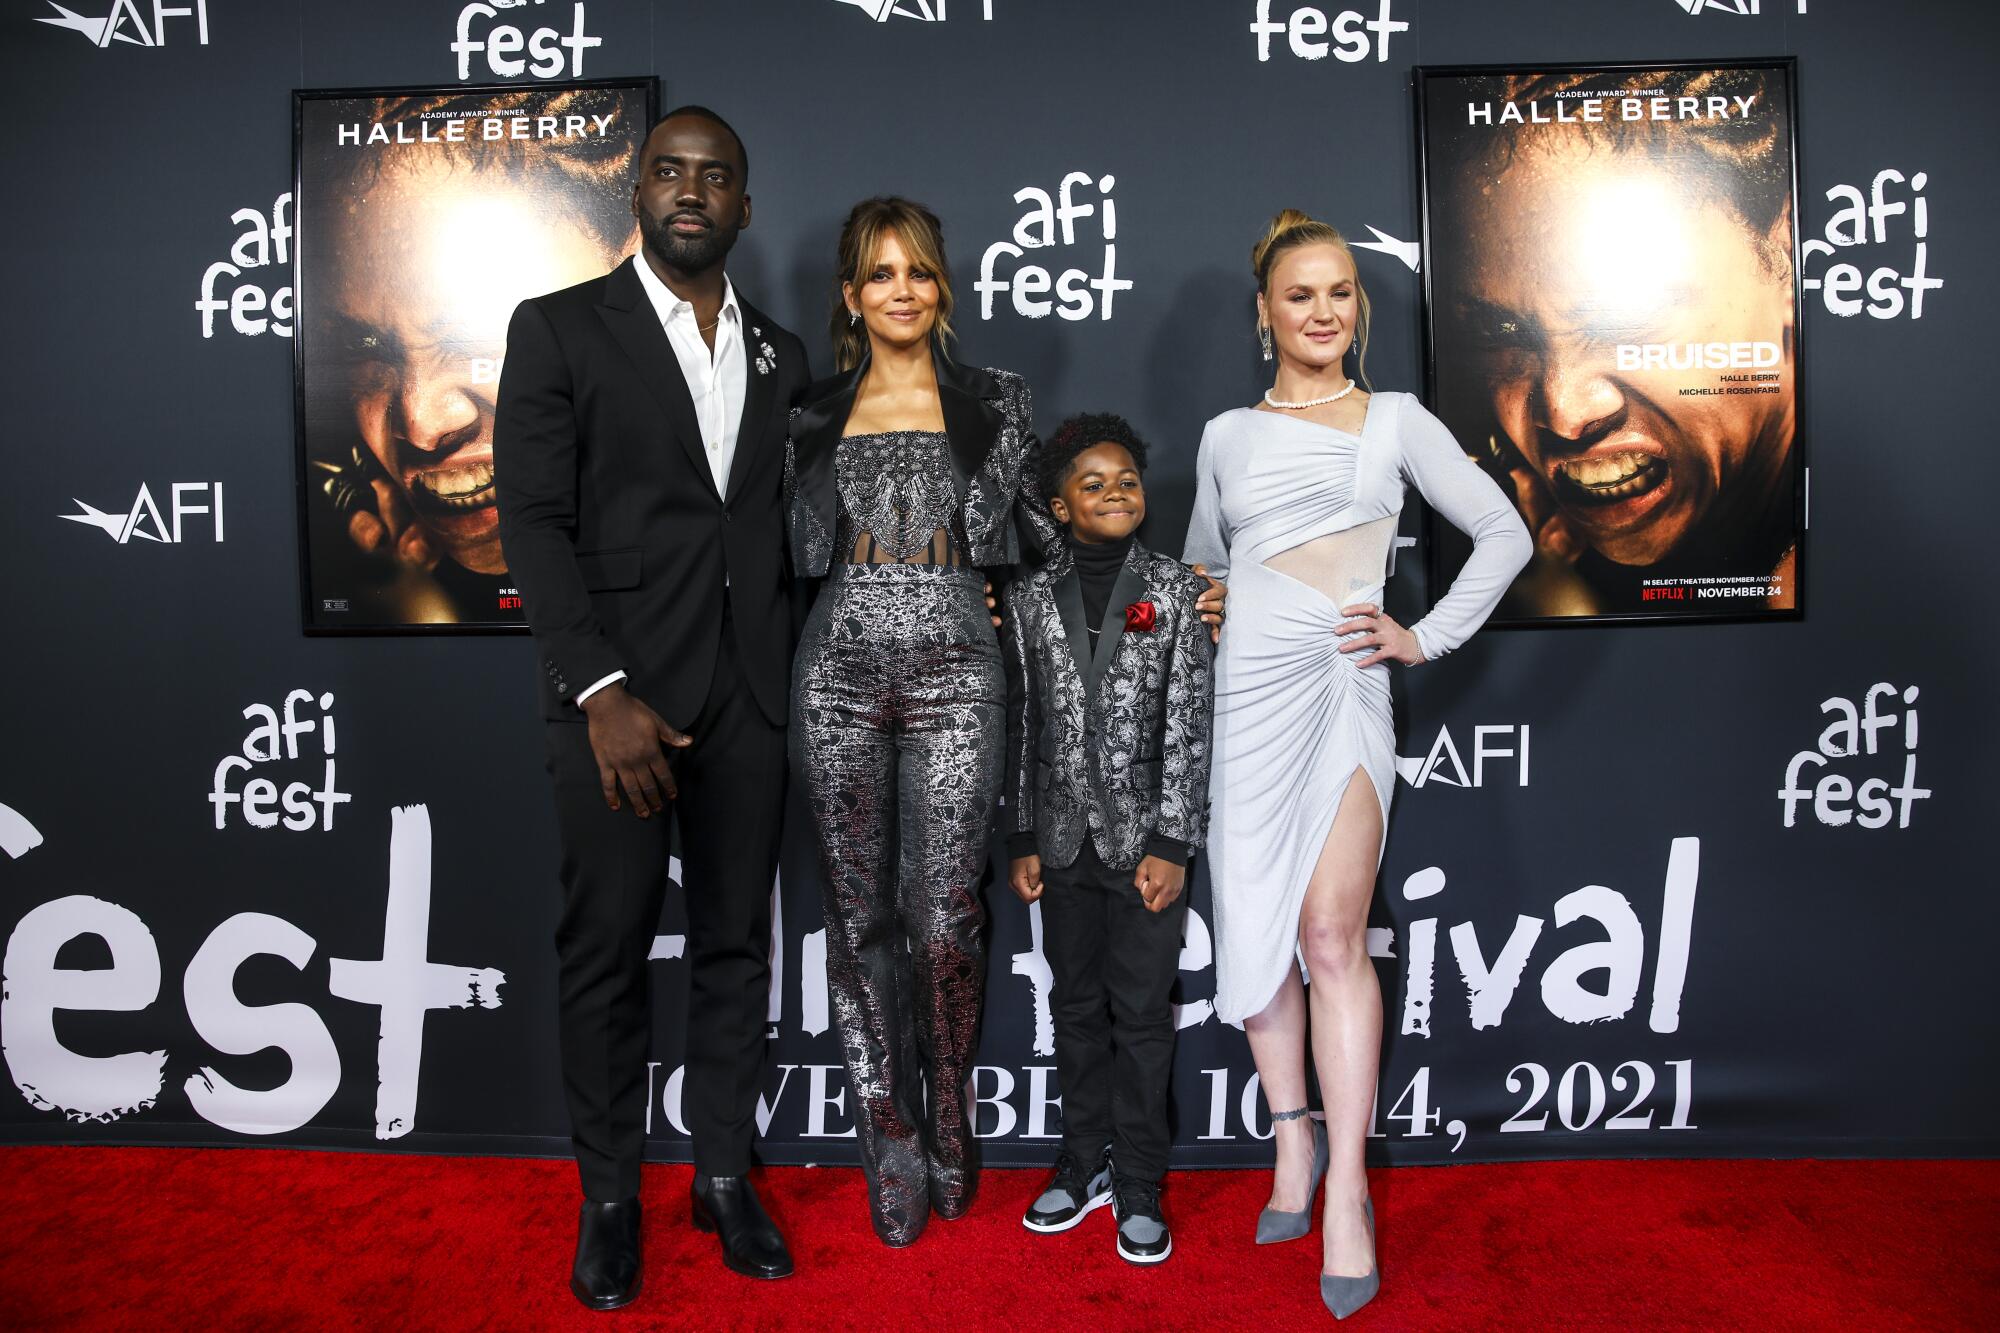 Shamier Anderson, Halle Berry, Danny Boyd Jr. and Valentina Shevchenko stand before a wall with AFI Fest logos and posters